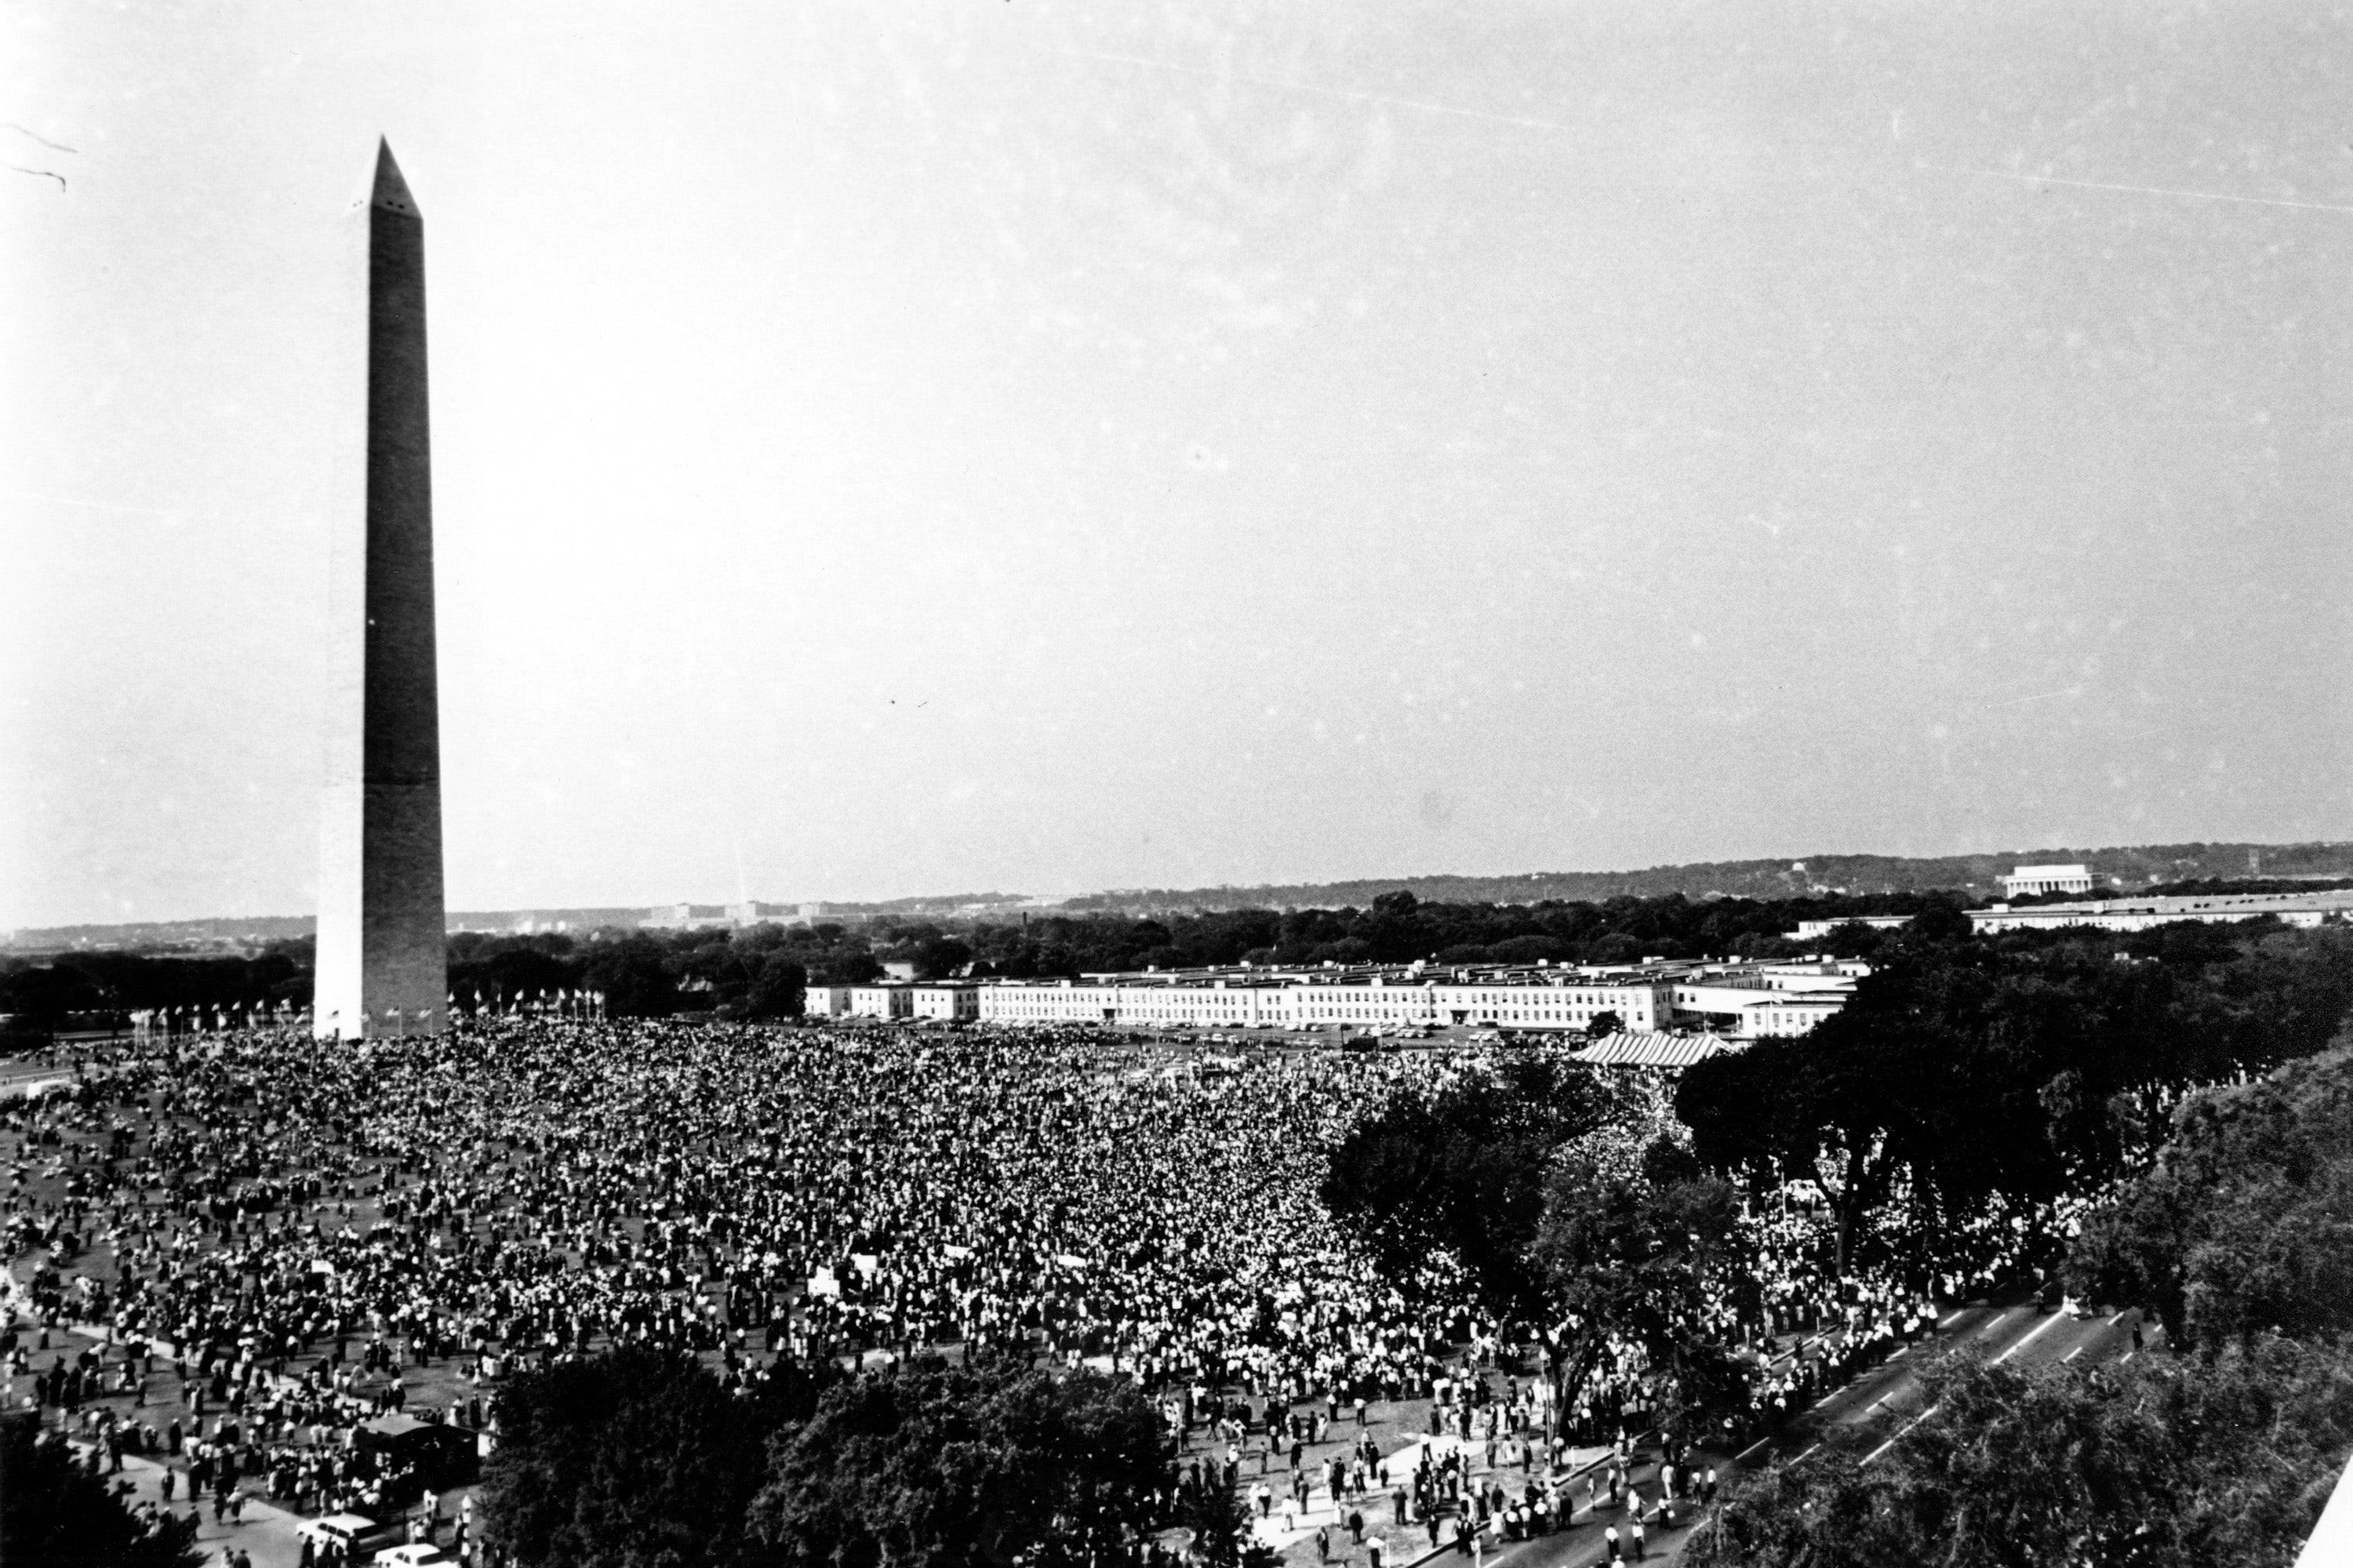 March on Washington, 1963: What to know